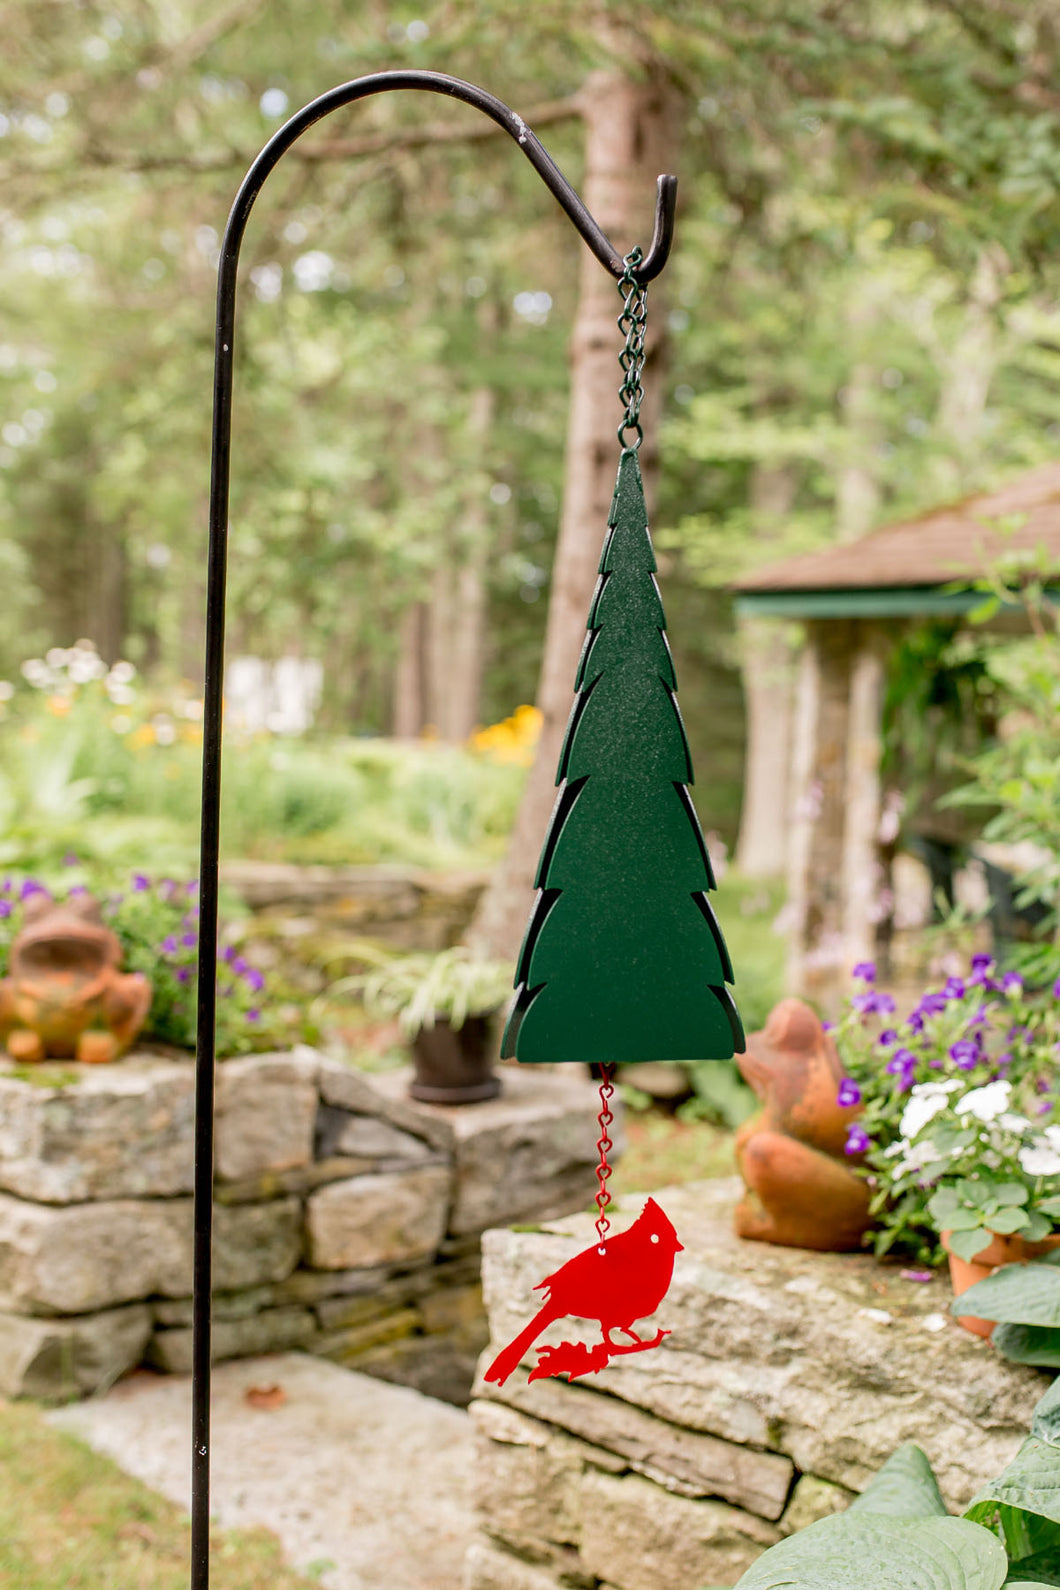 North Country Wind Bells - Pointed Fir of the North - 14